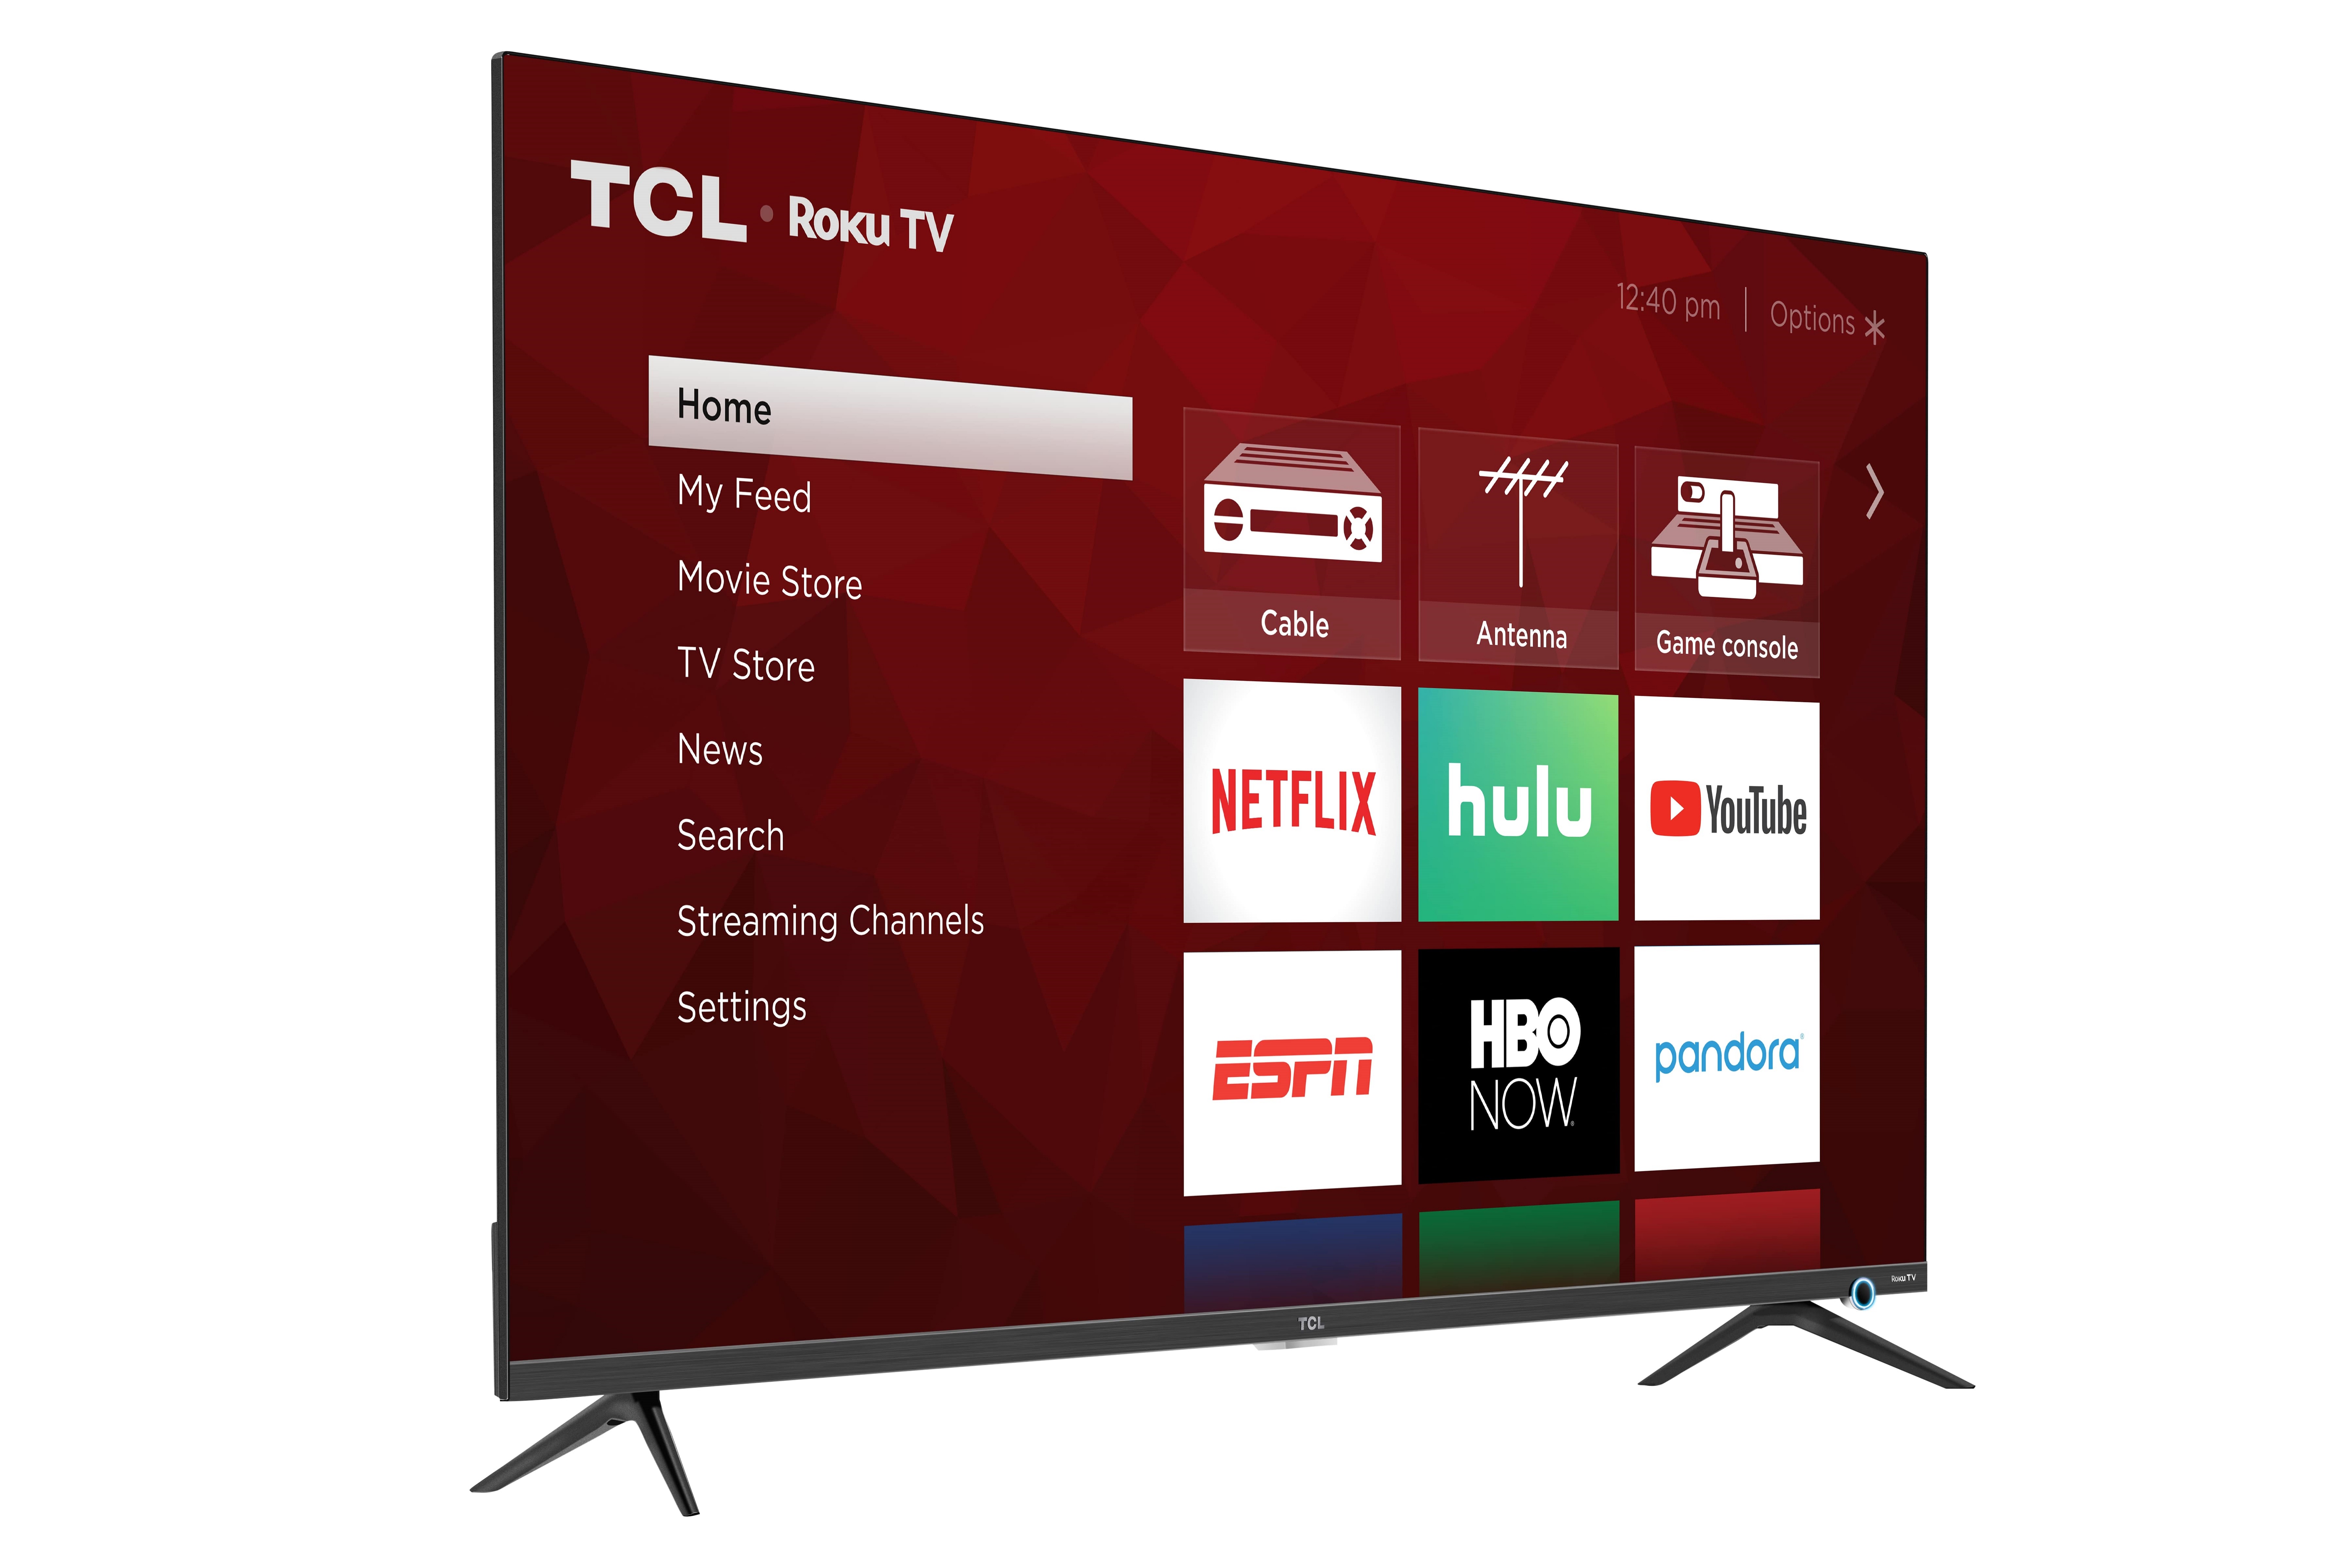 TCL 65 Class 5-Series 4K UHD Dolby Vision HDR LED Roku Smart TV - 65S525 - image 2 of 12